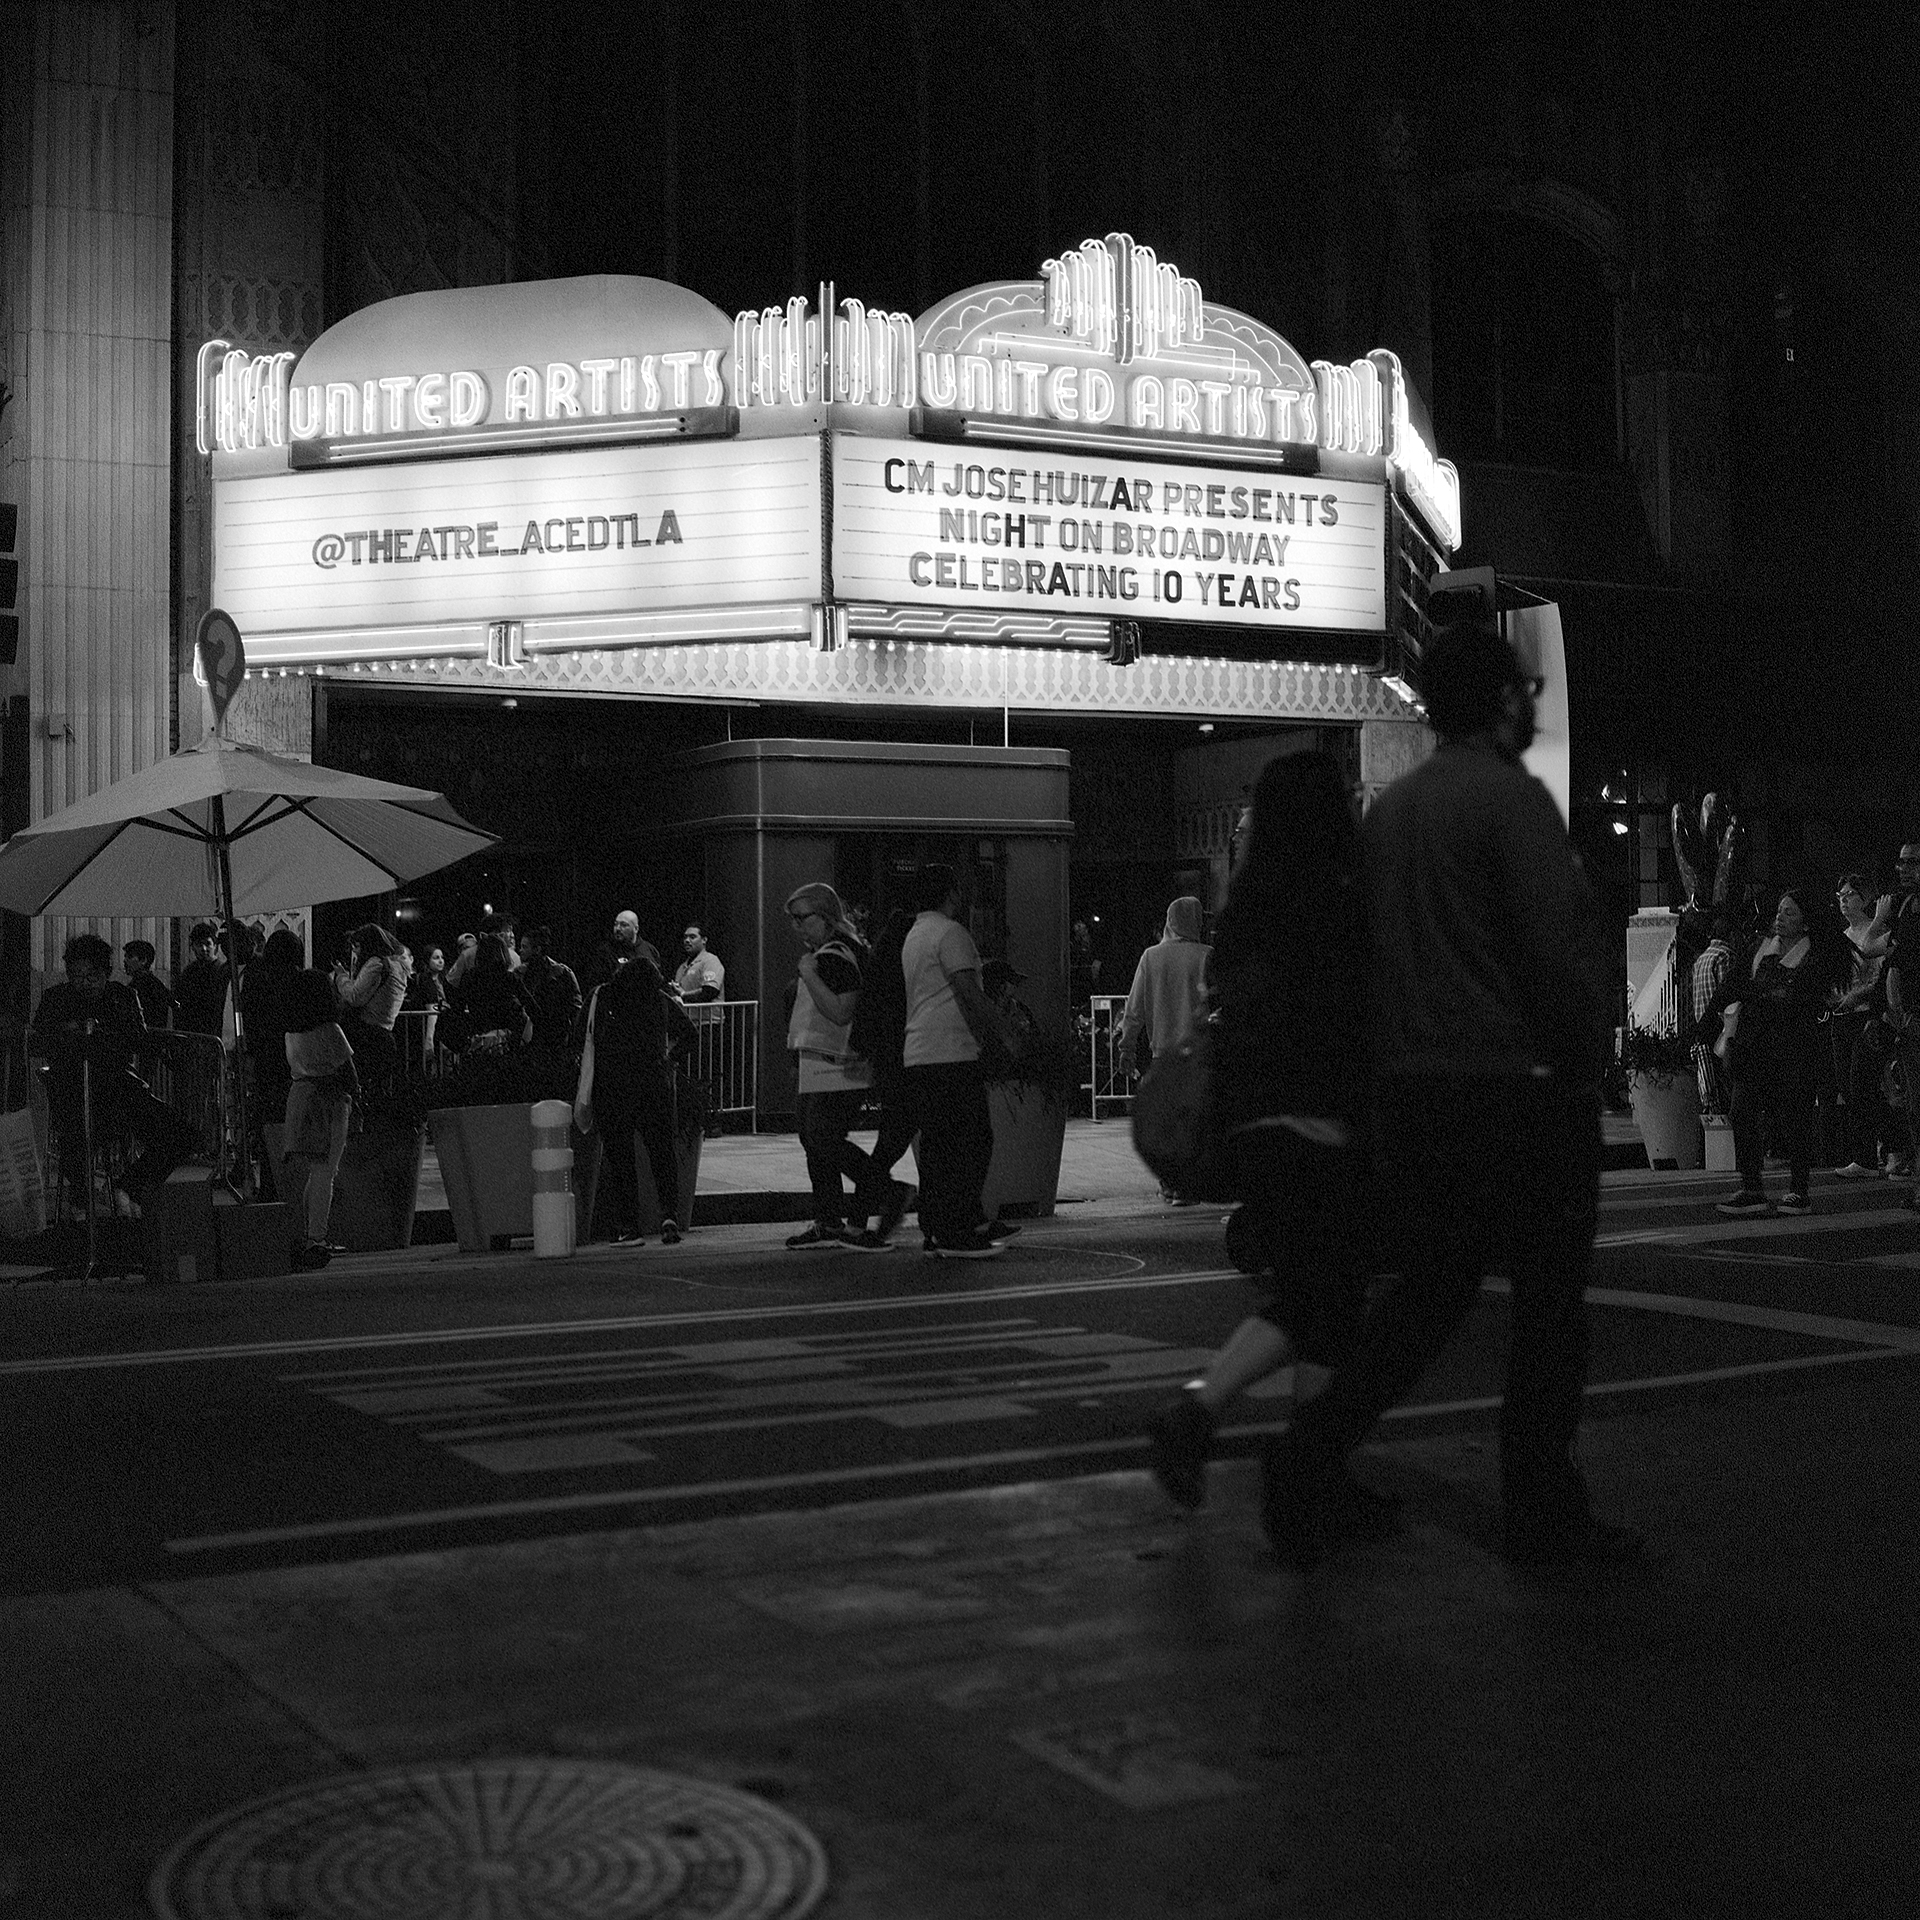 Ace Hotel Theater during the 10th anniversary of night on Broadway